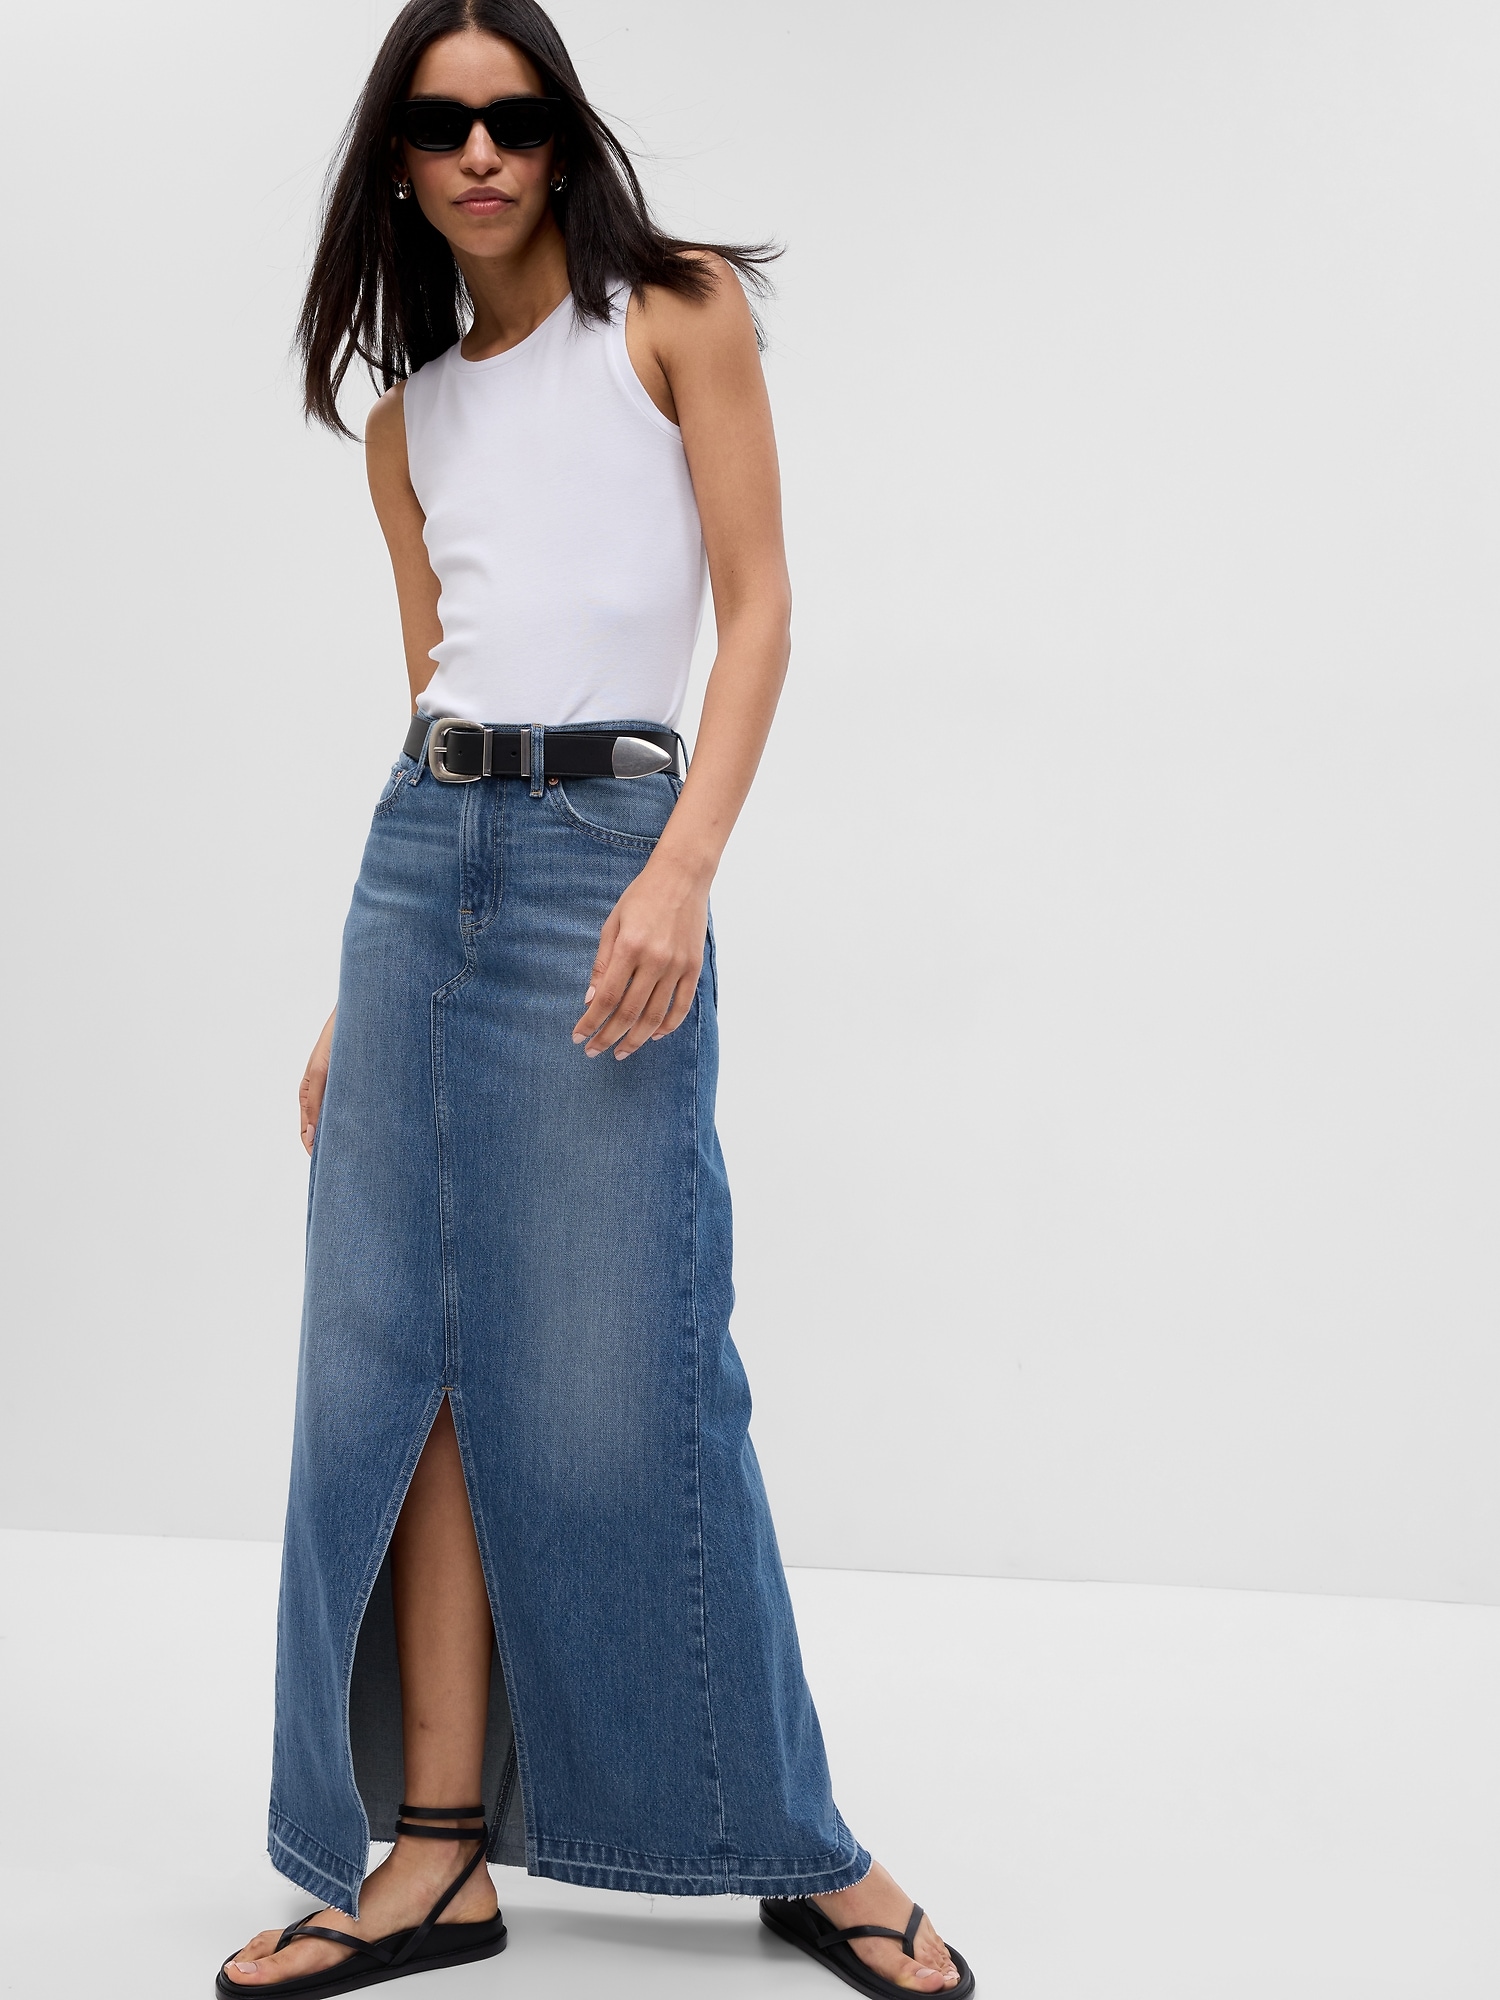 Give IT Girl Vibes, Wear A Denim Maxi Skirt Like This